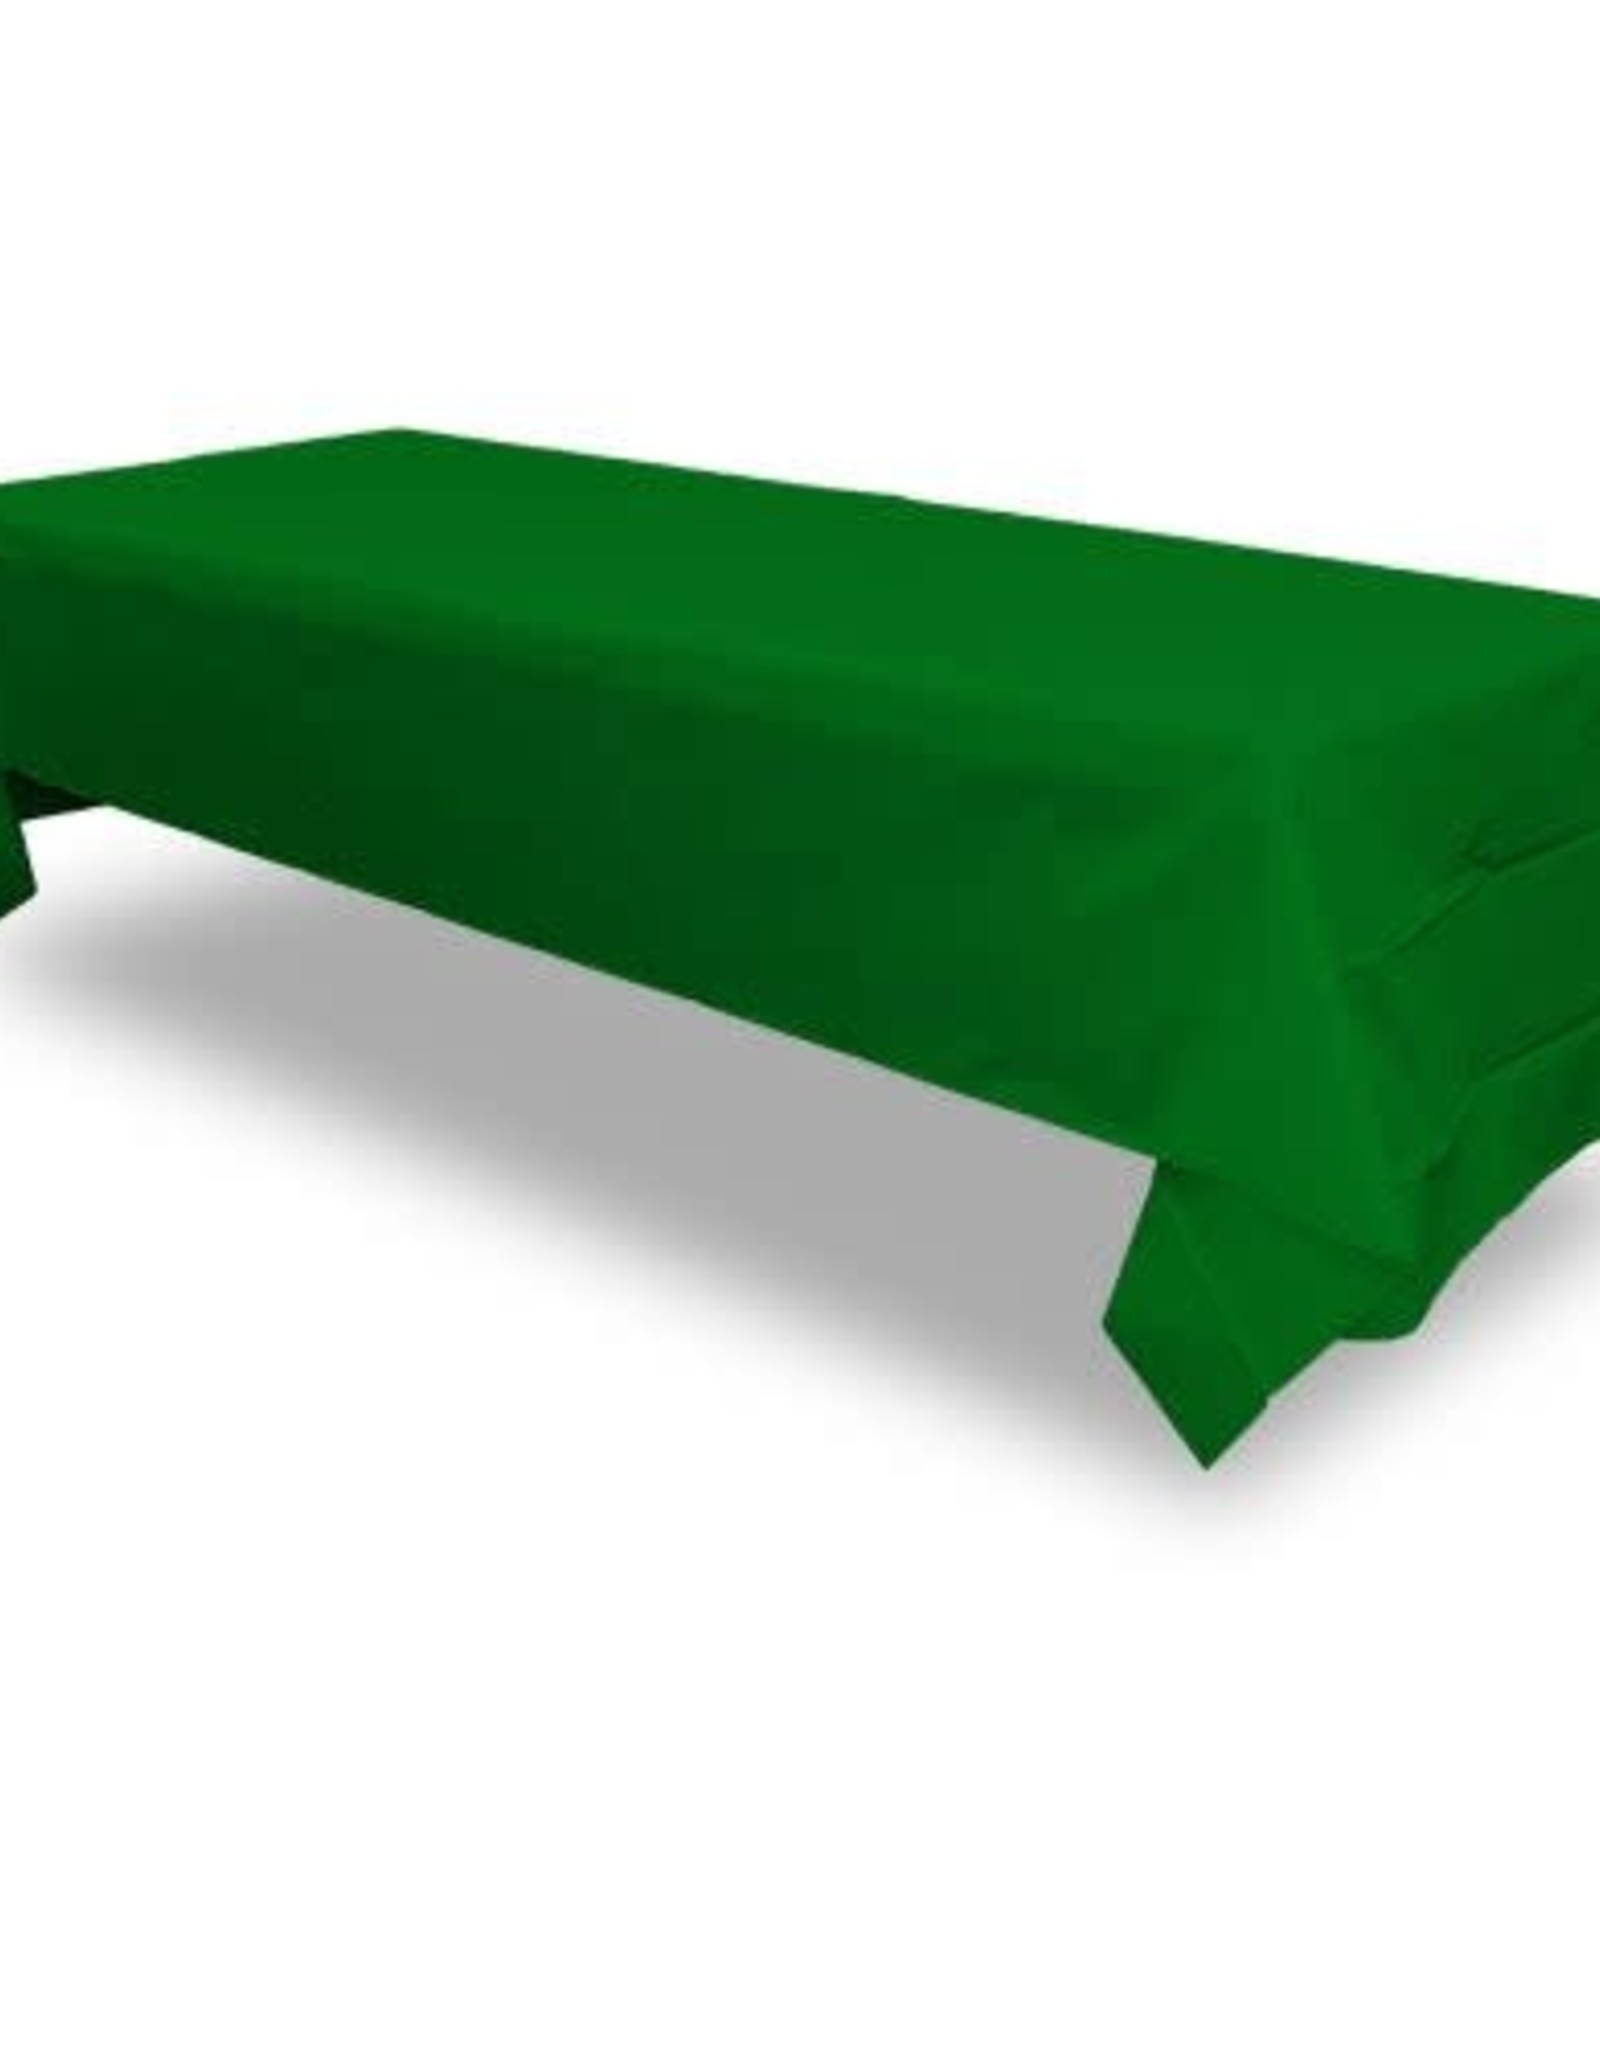 Green 54in x 108in Table Cover